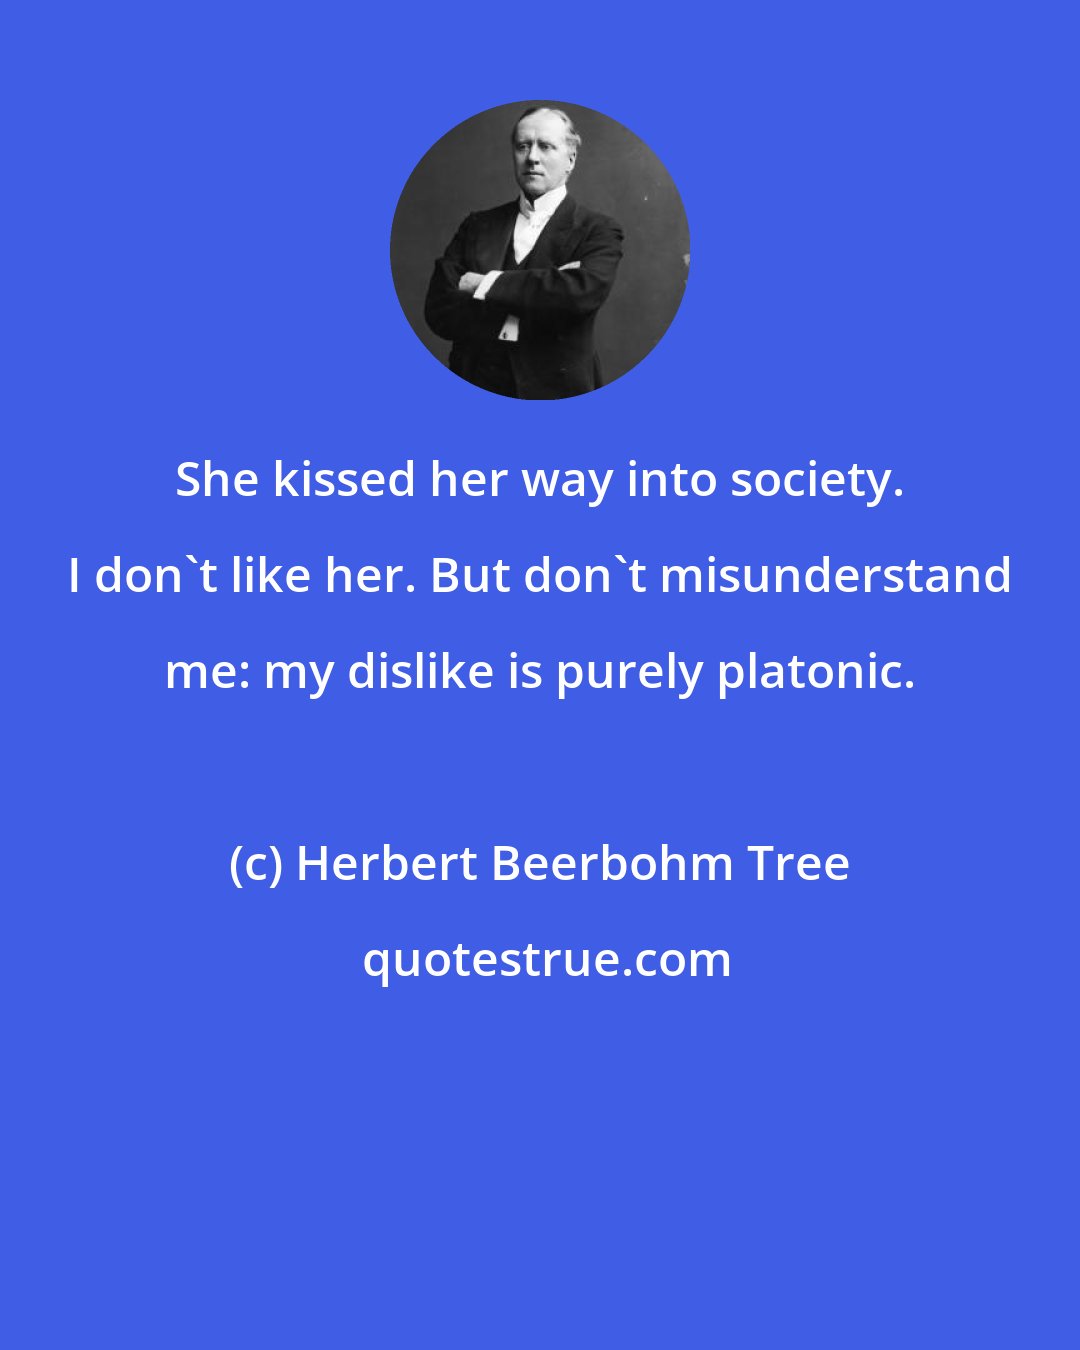 Herbert Beerbohm Tree: She kissed her way into society. I don't like her. But don't misunderstand me: my dislike is purely platonic.